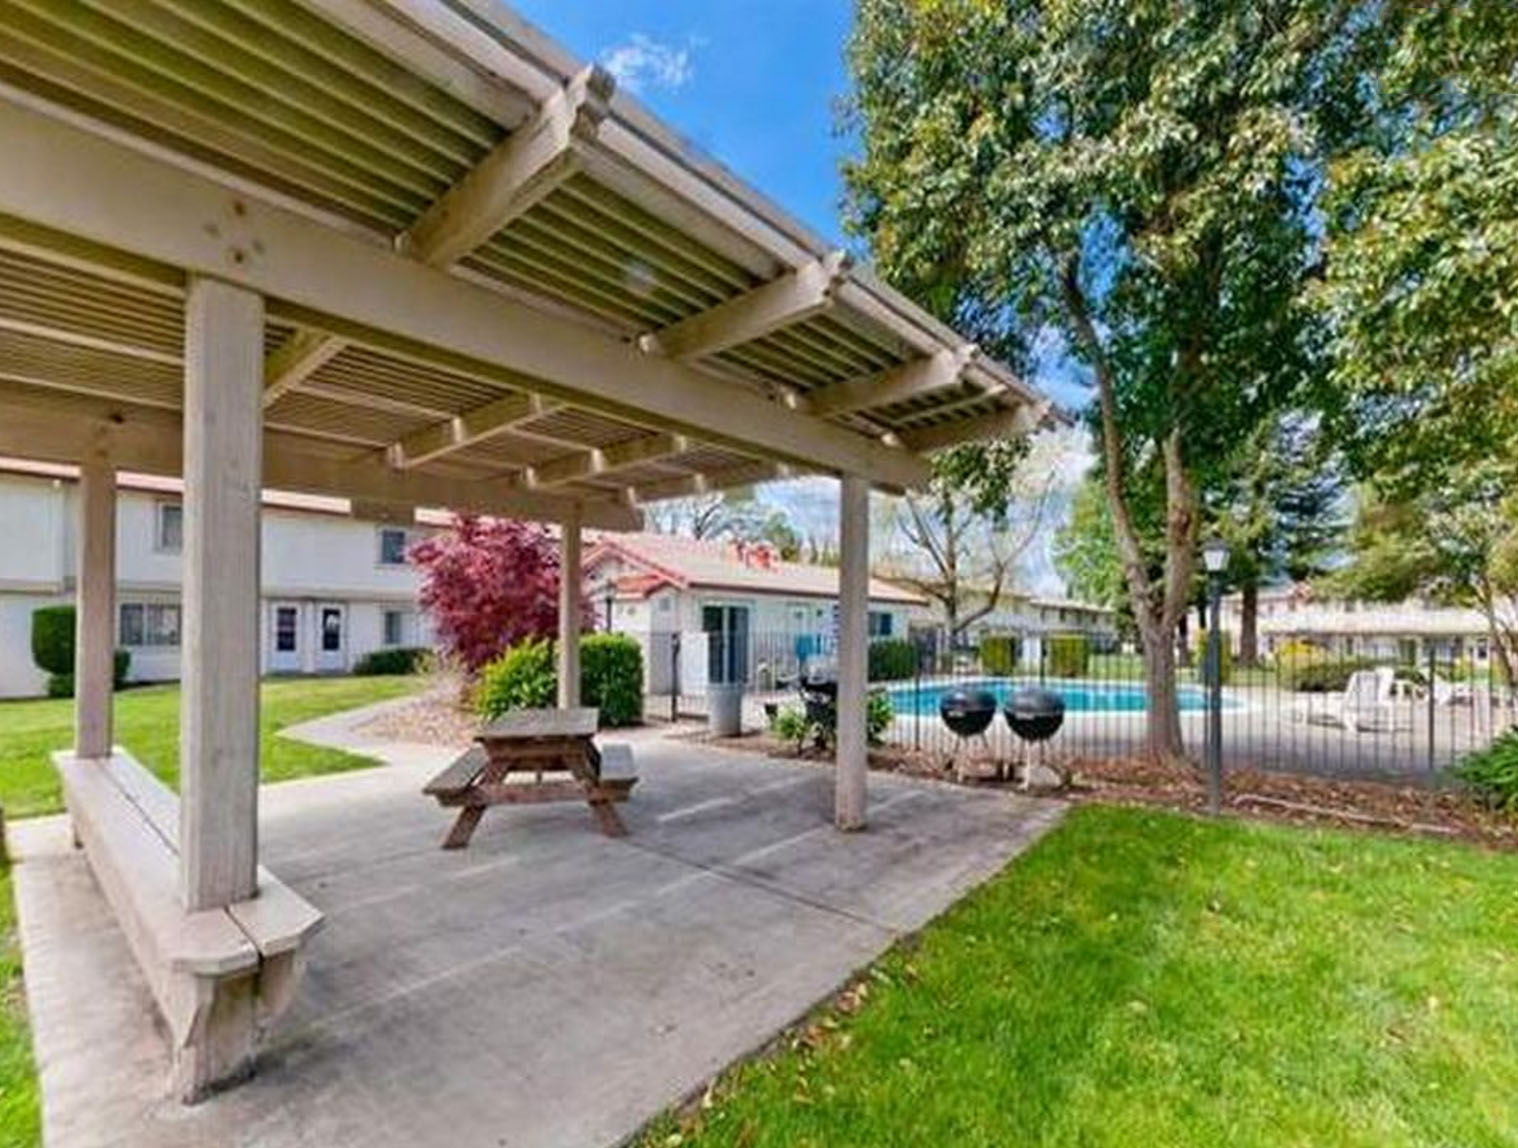 What You Can Rent For Under 1500 In Sonoma County Real Sonoma